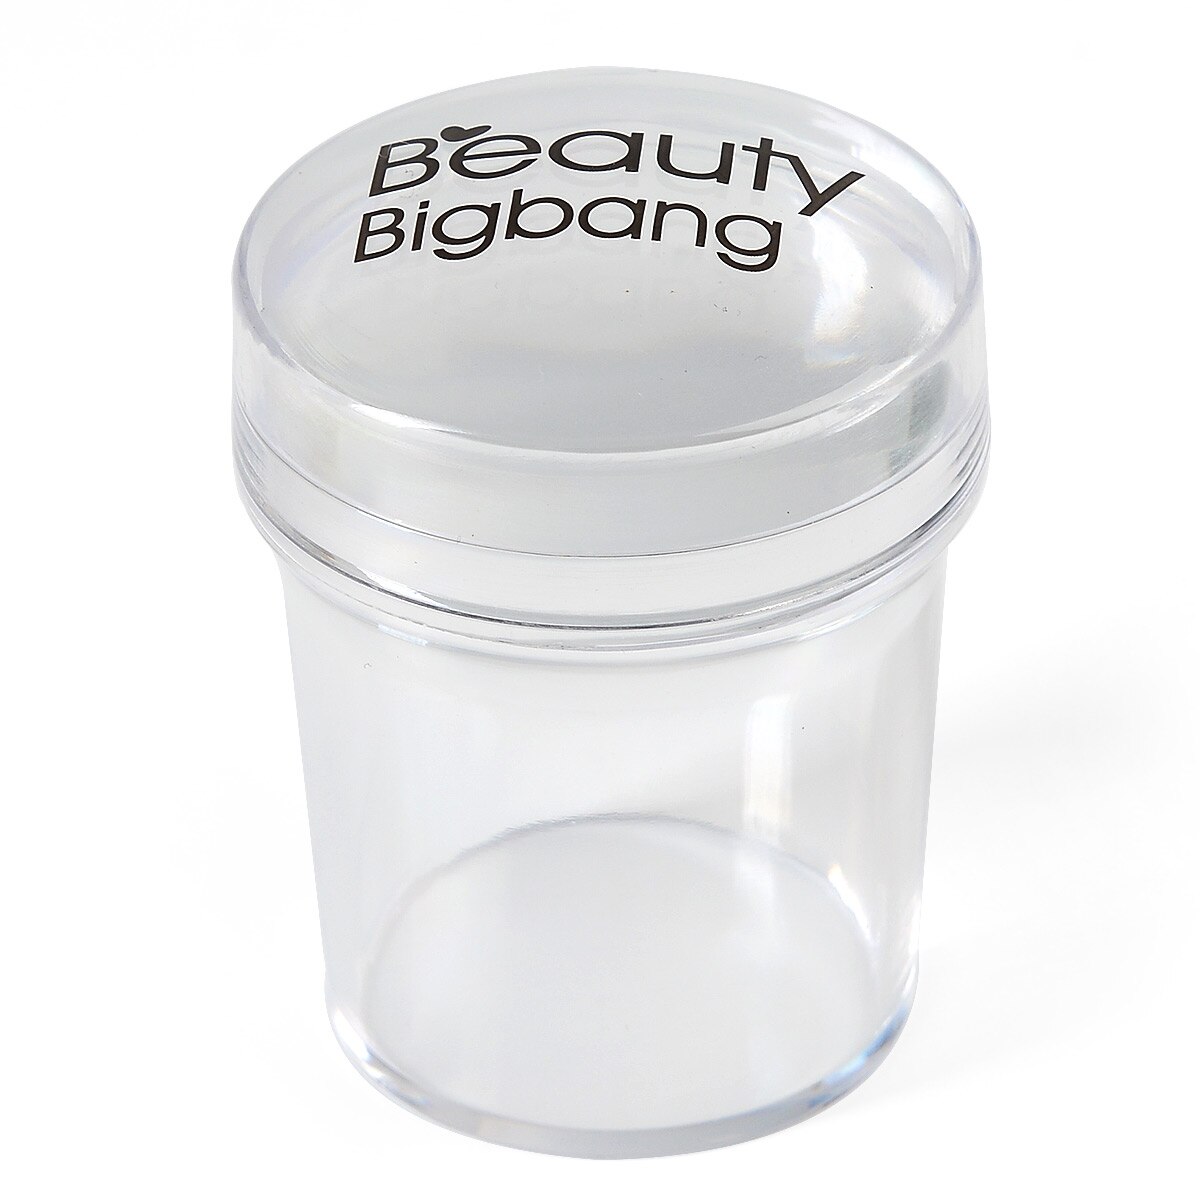 1 Pc Beautybigbang Nail Art Clear Jelly Stamper Marshmallow Stamper